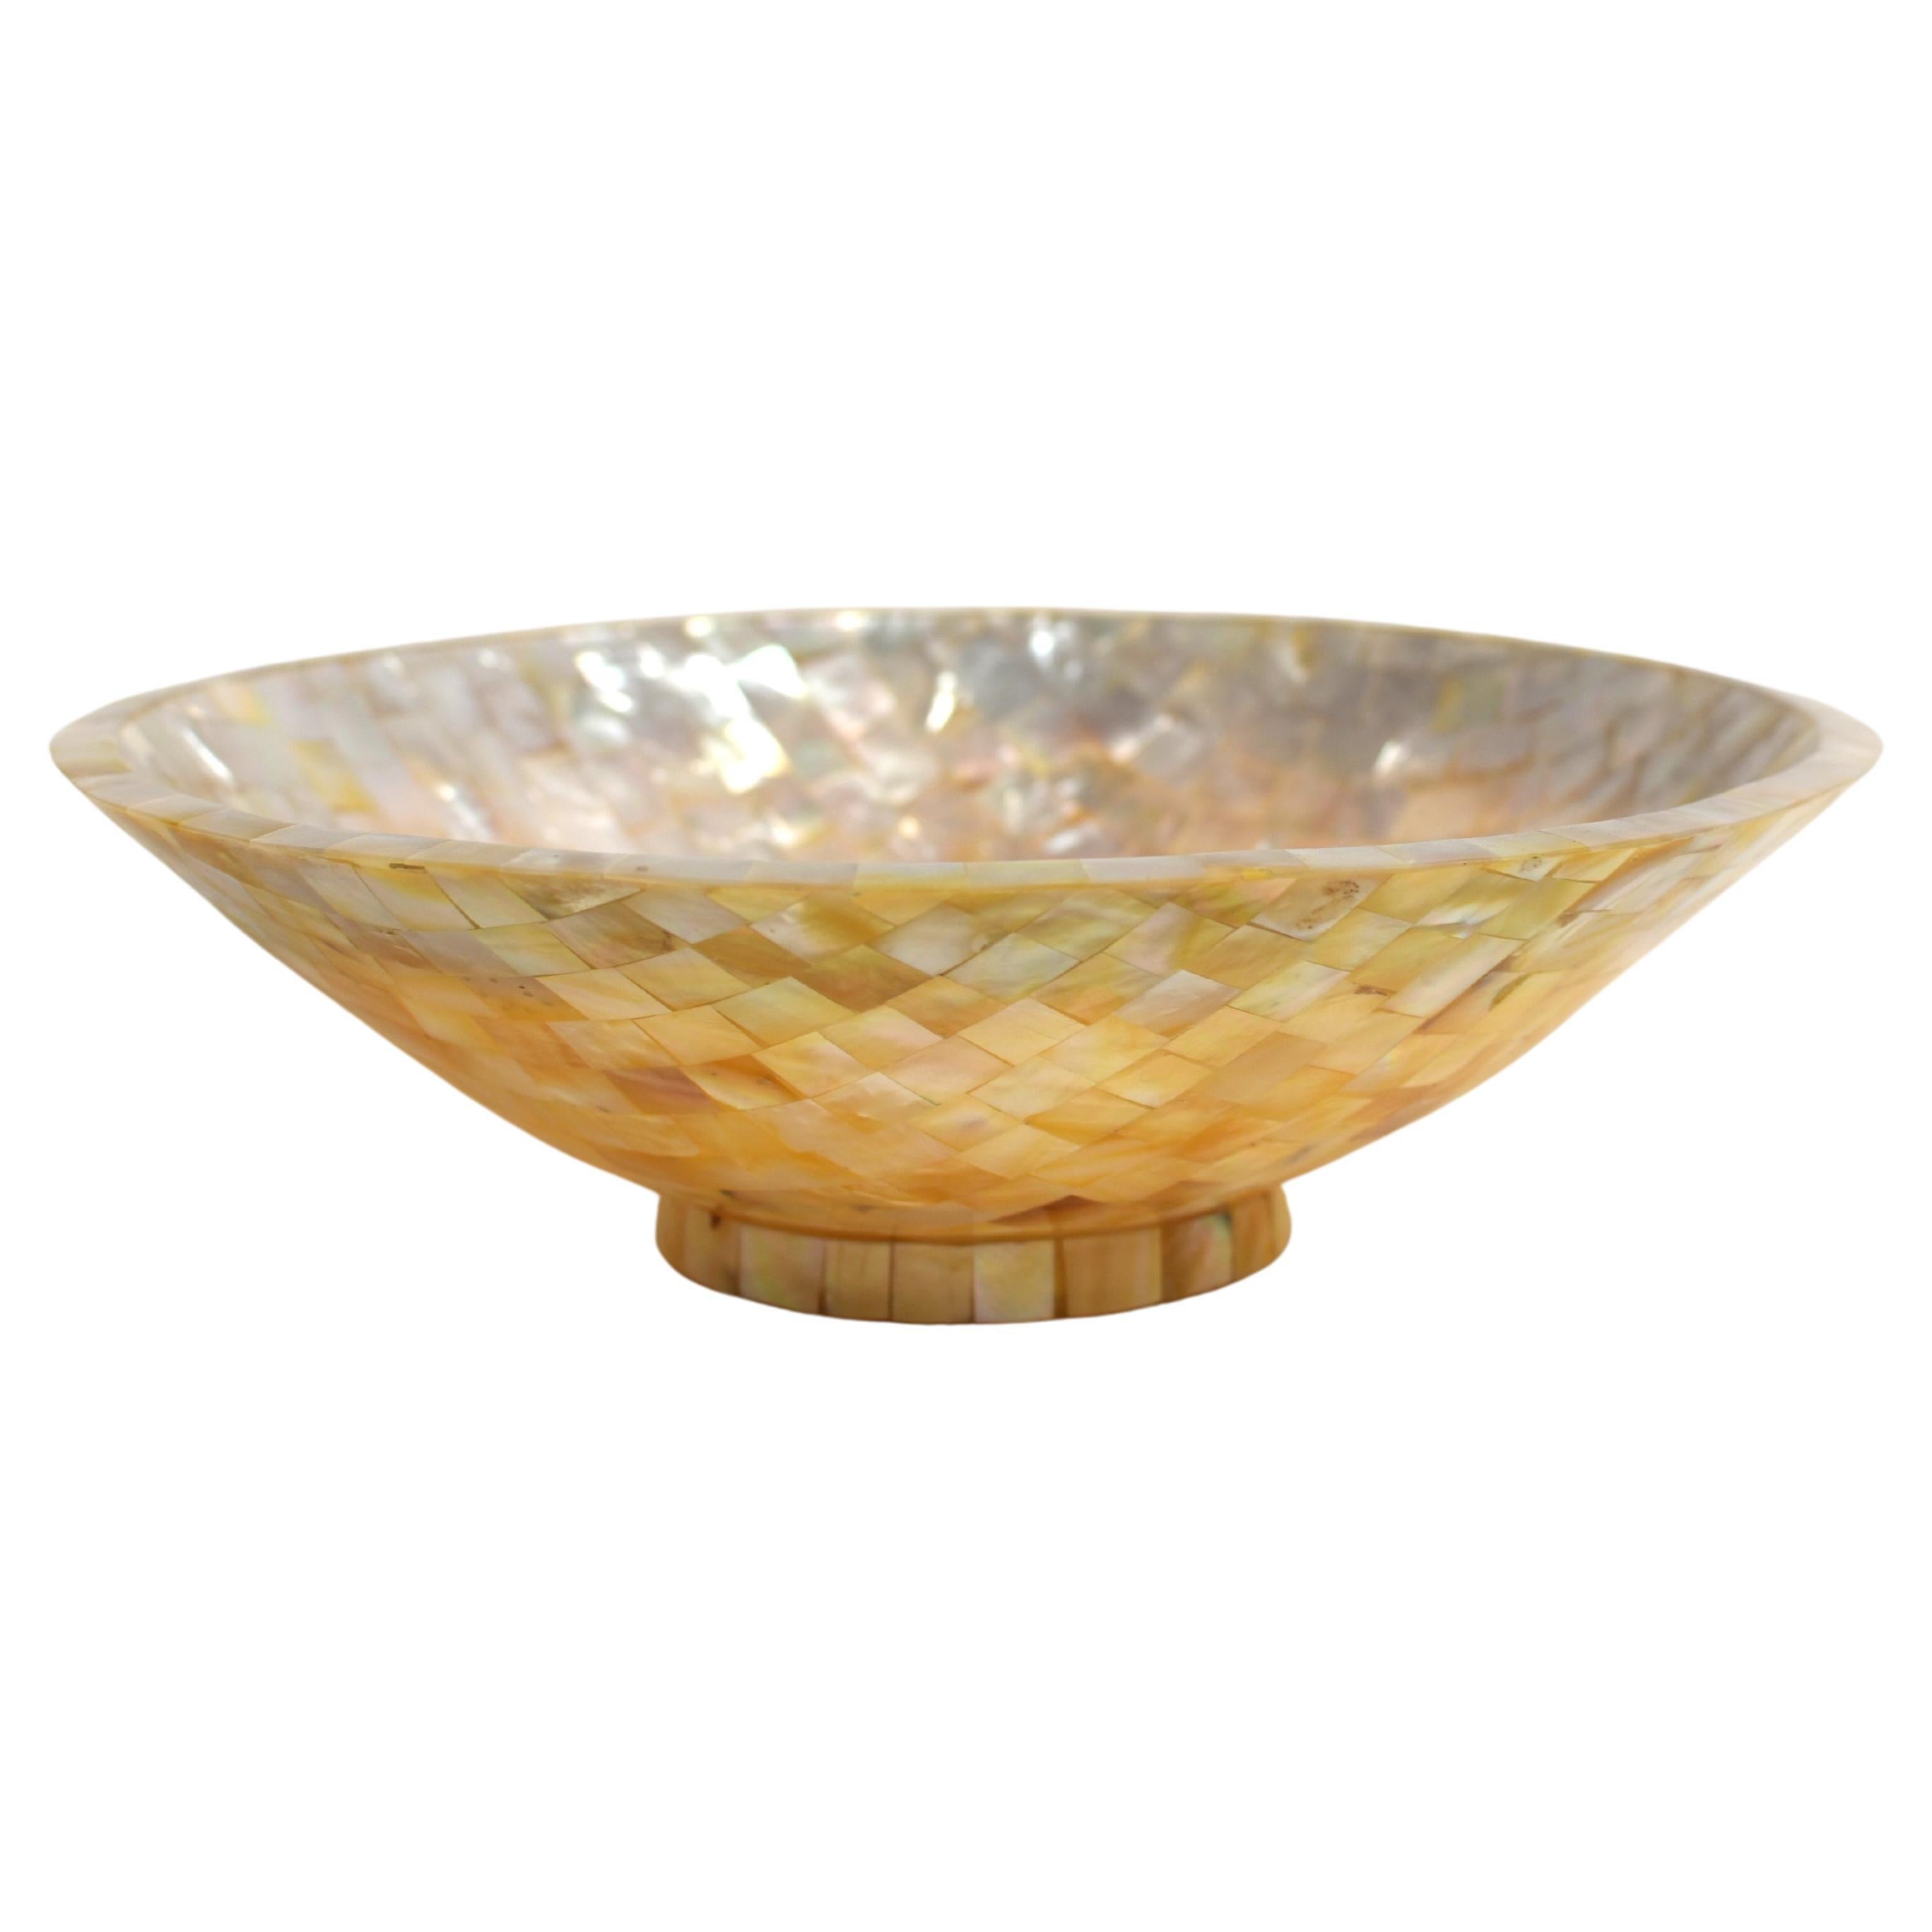 Mother of Pearl Bowl 8.5"